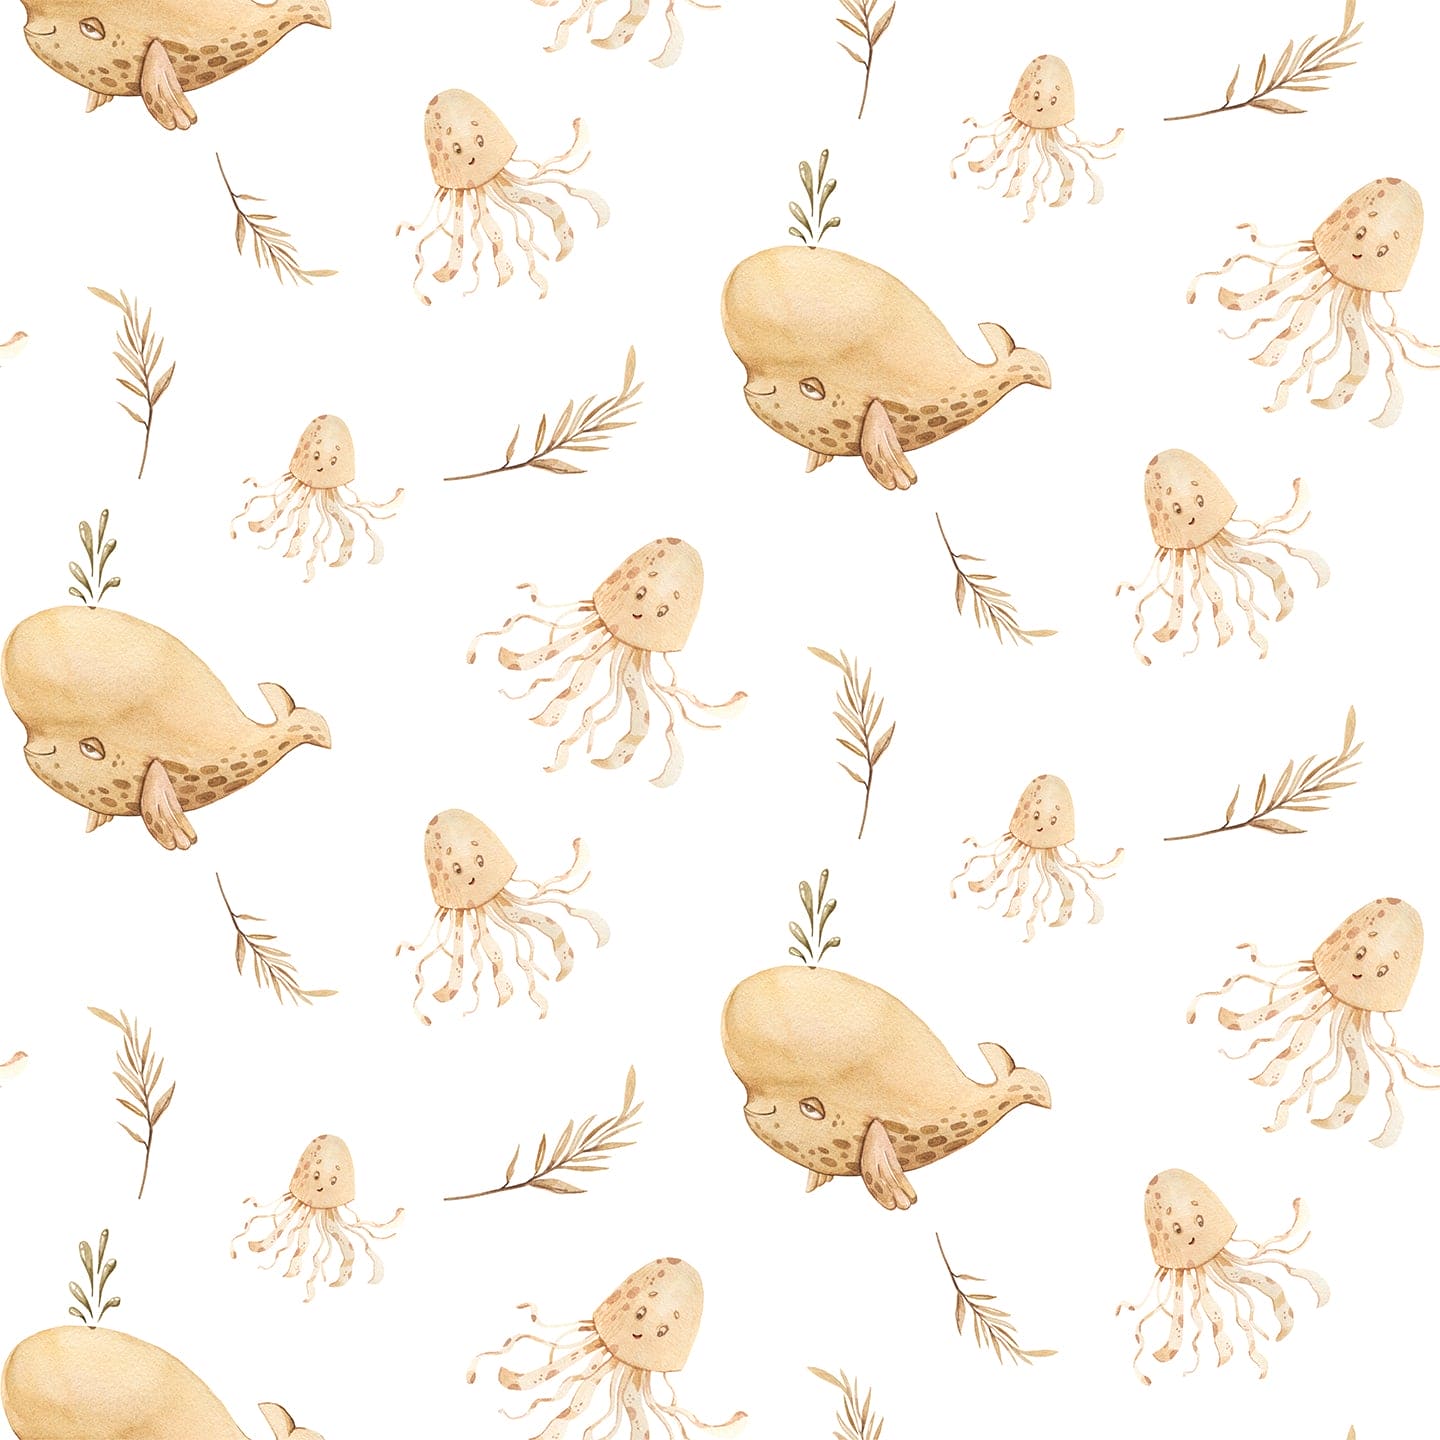 Seamless pattern of Nursery Animal Wallpaper with aquatic animals and foliage in watercolor